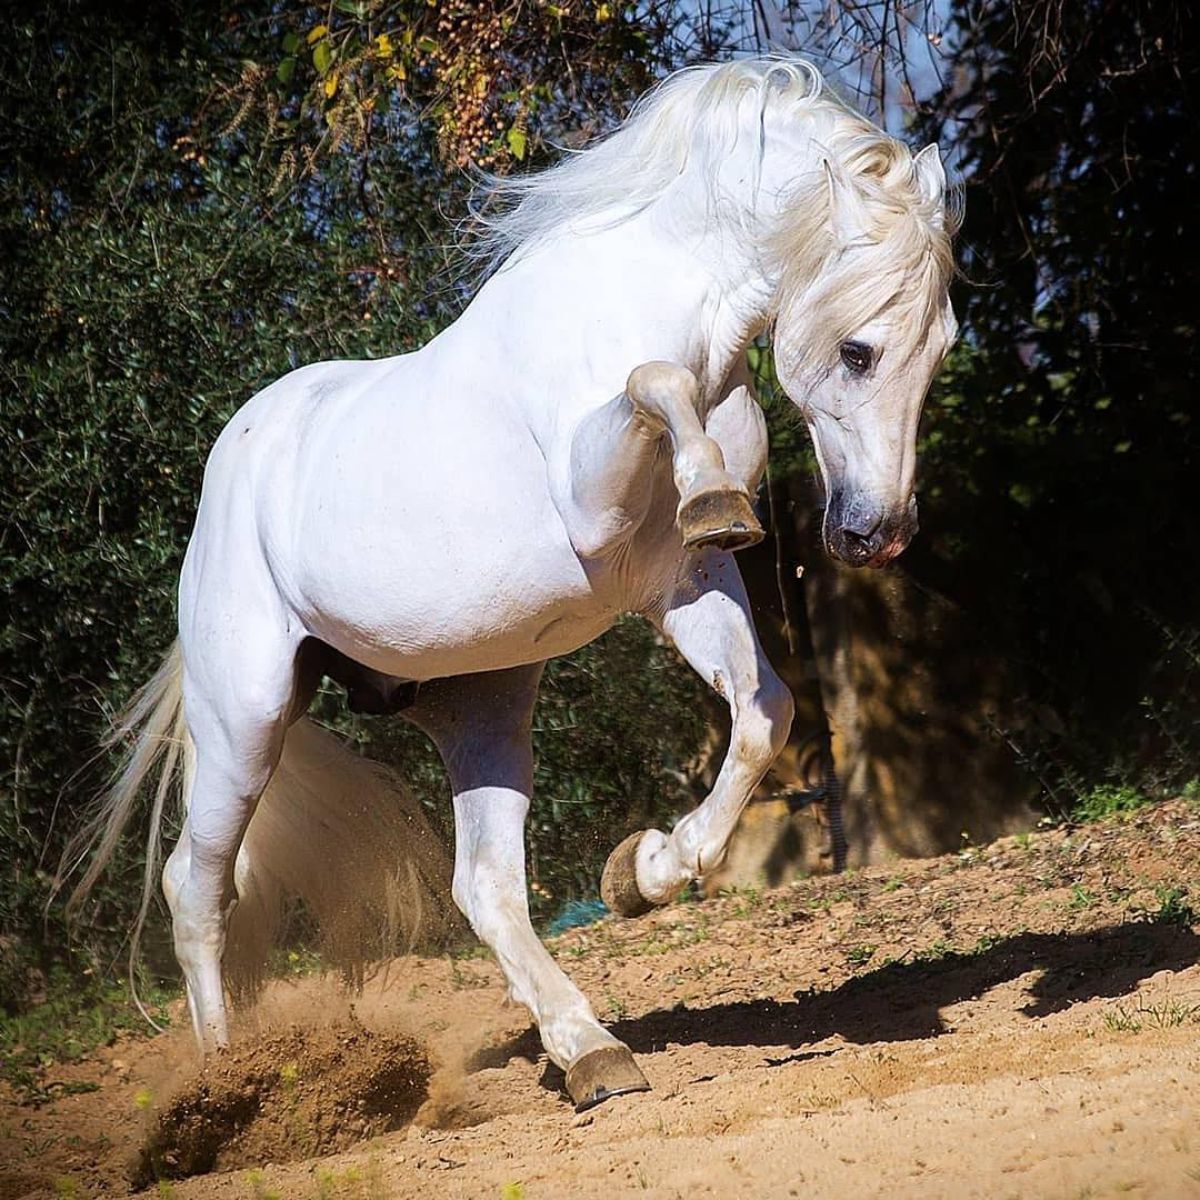 A beautiful white Andalusian Horse jumps on the ground.